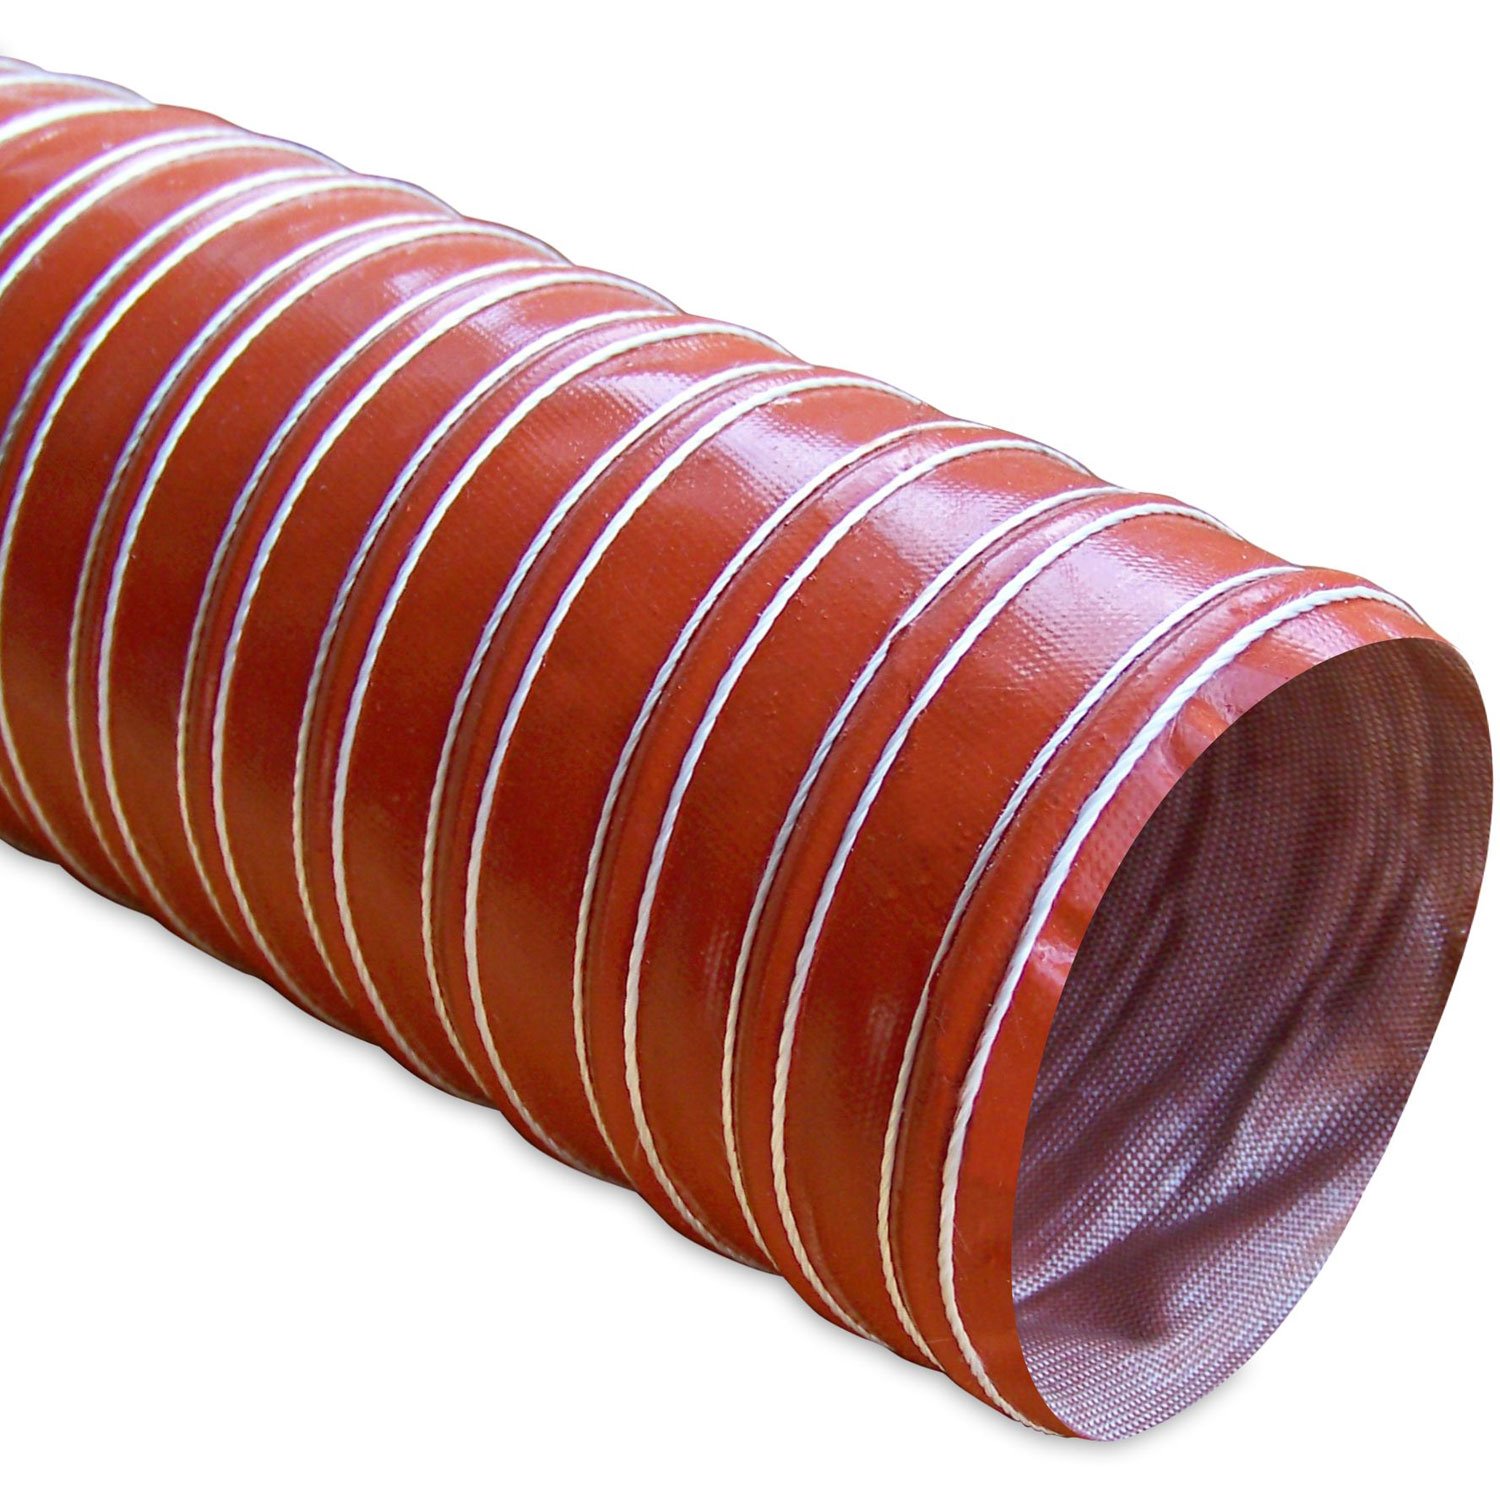 Heat Resistant Silicone Ducting 4 x 12 -